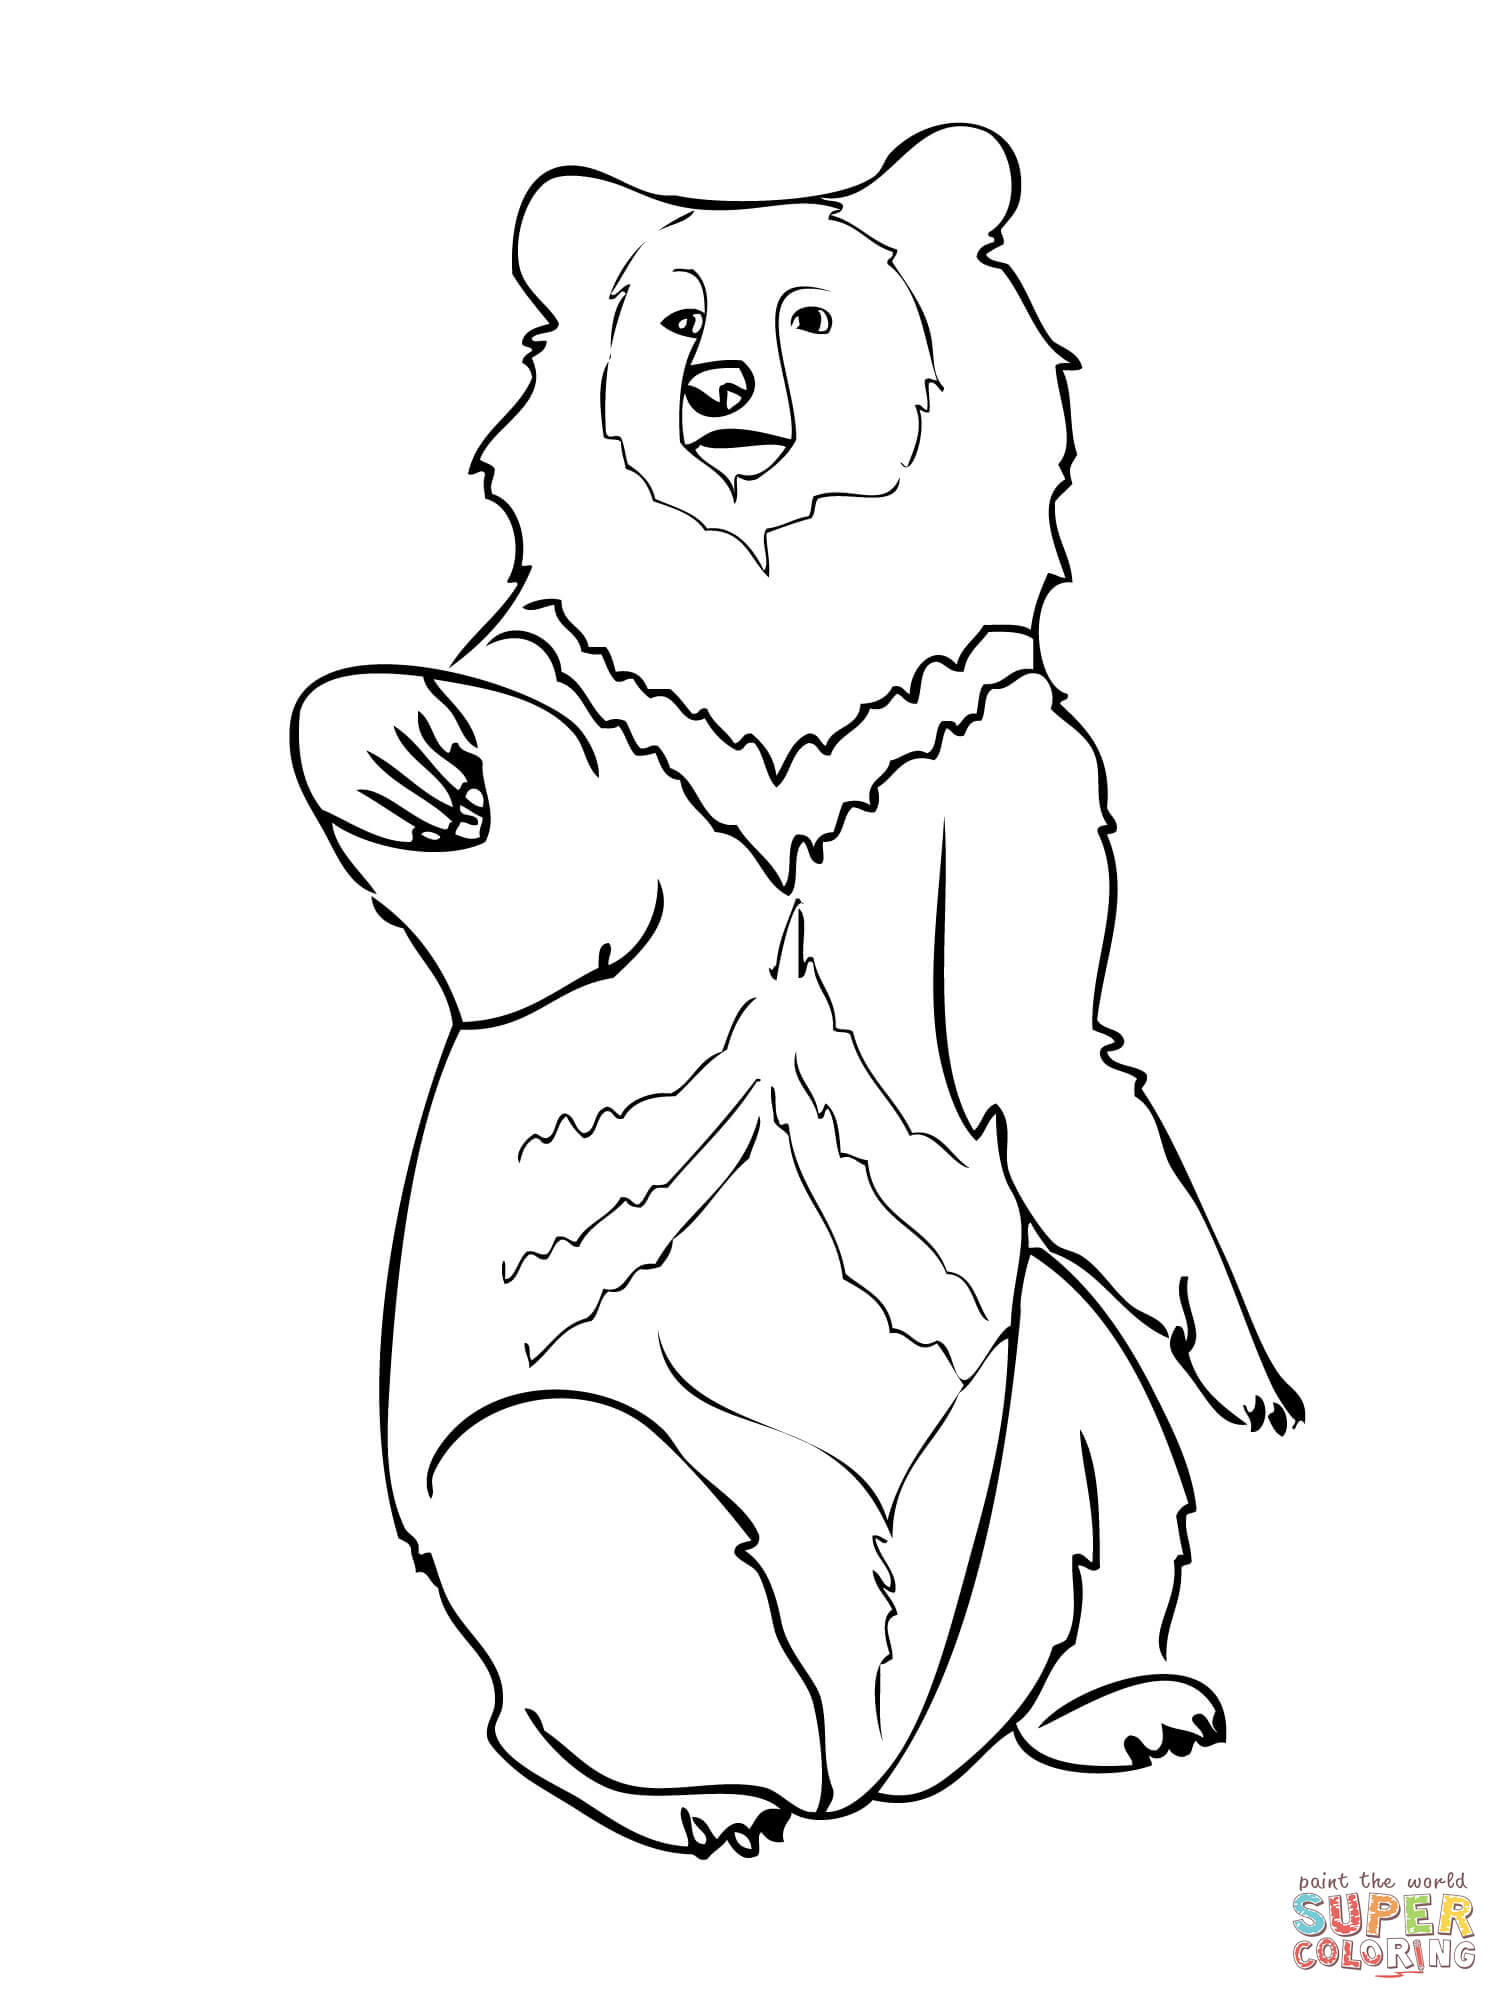 Bears Coloring Pages Asia Black Bears Coloring Pages Photo Album Sabadaphnecottage